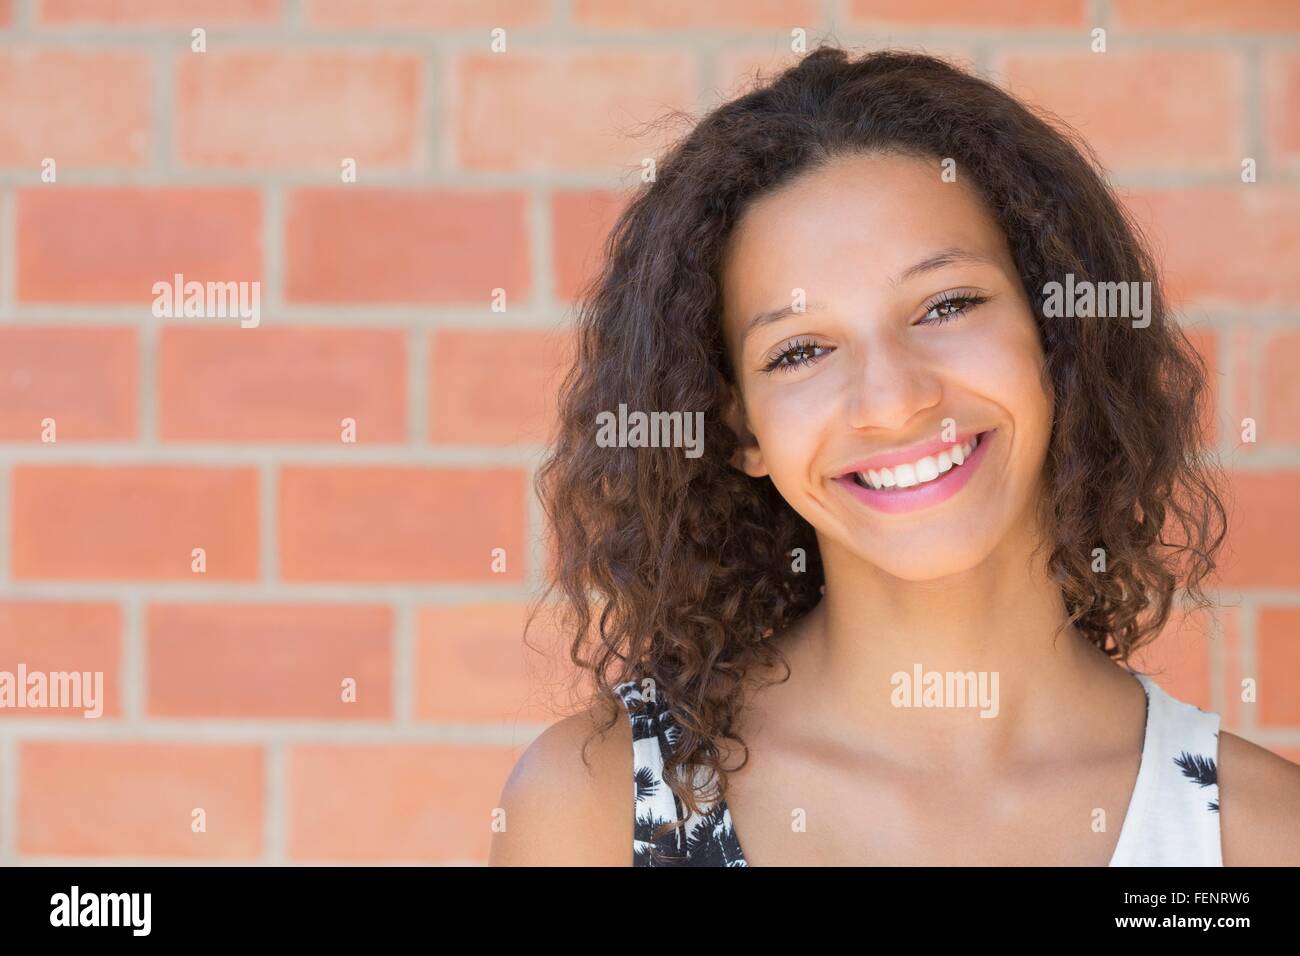 Portrait of happy girl in front of brick wall Banque D'Images